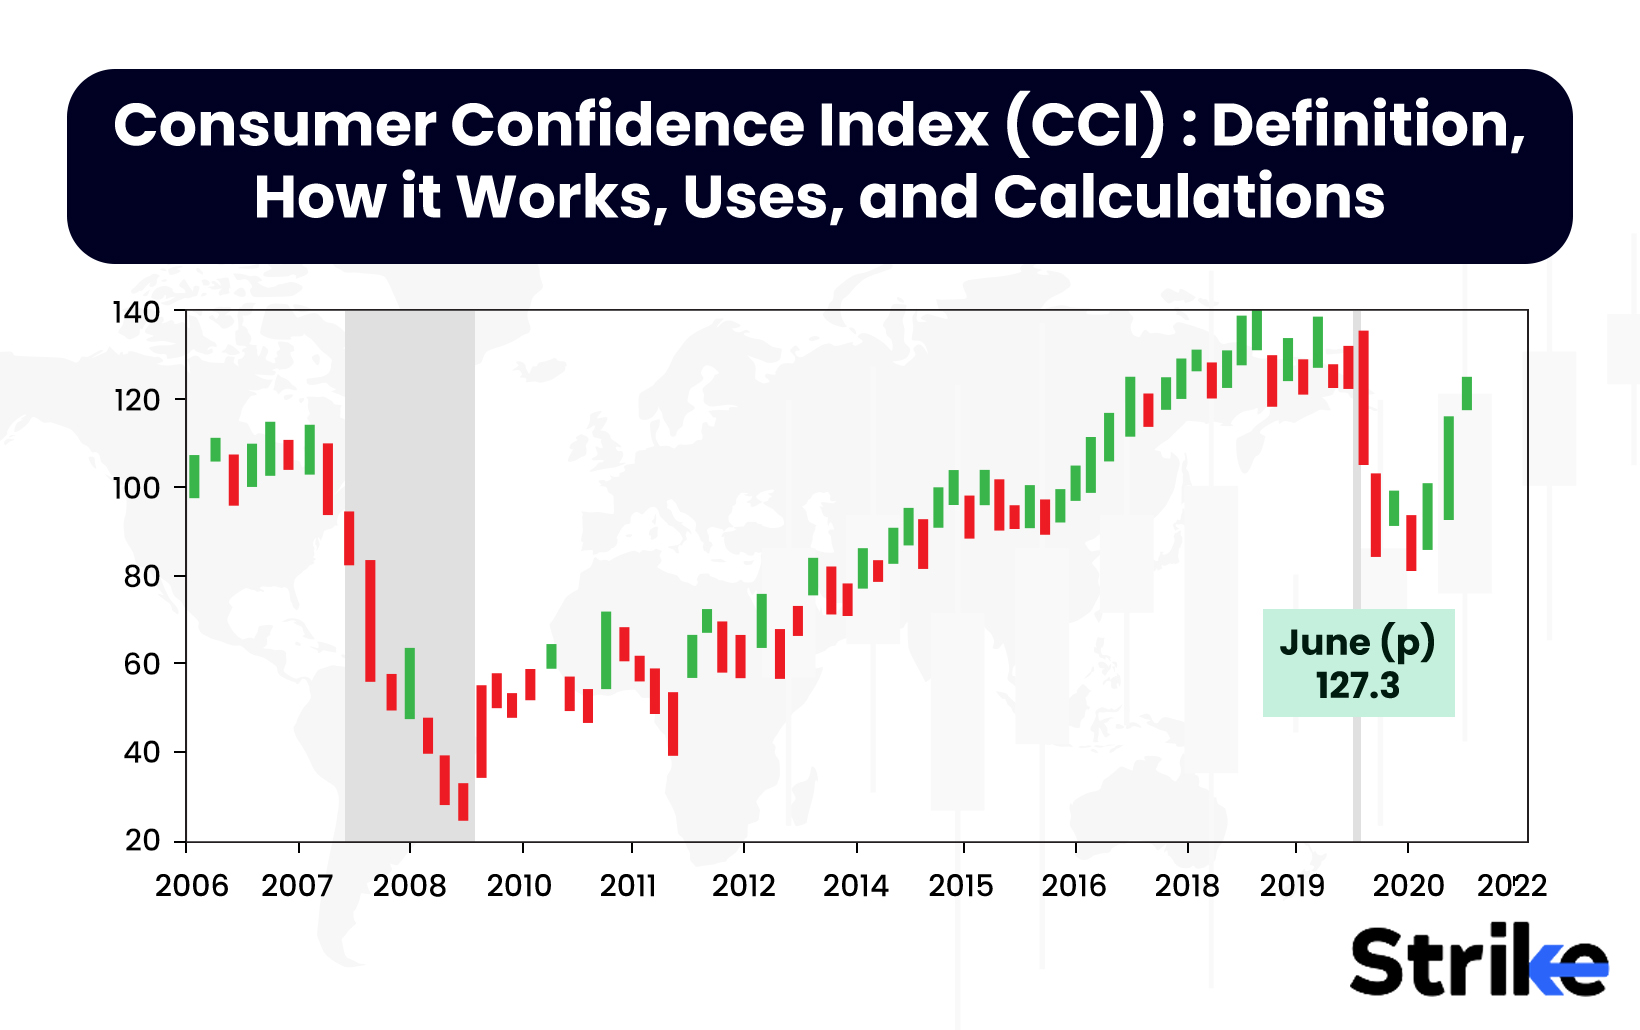 Consumer Confidence Index (CCI): Definition, How it Works, Uses, and Calculations